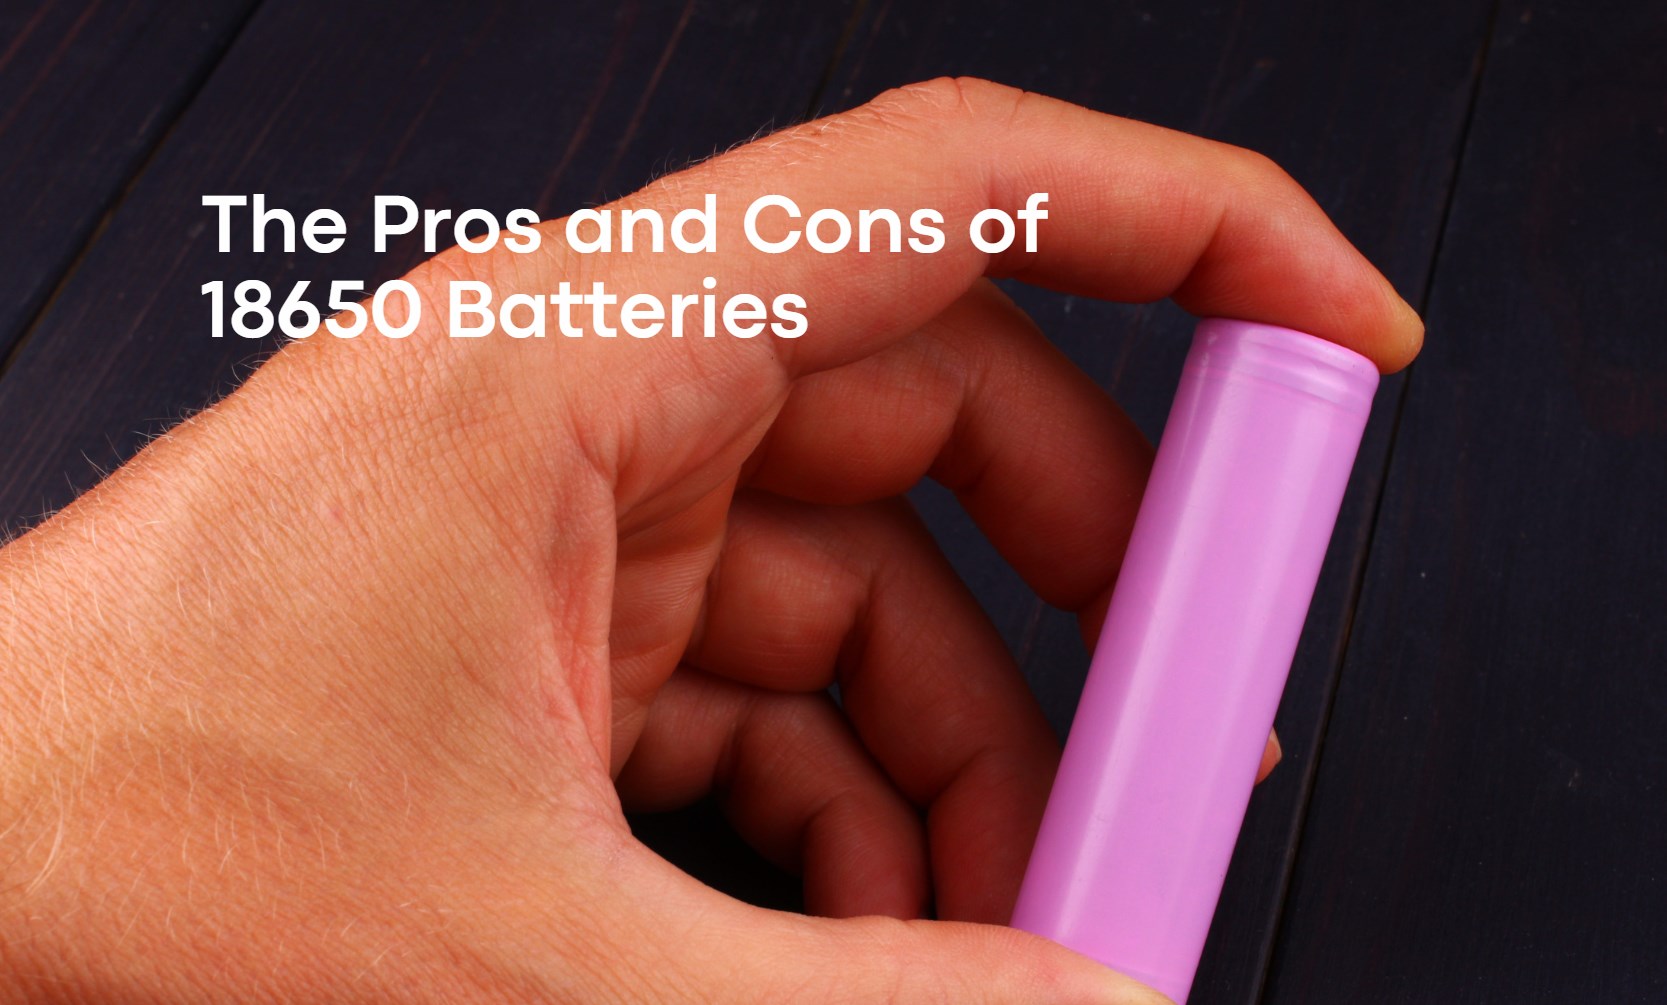 The Pros and Cons of 18650 Batteries